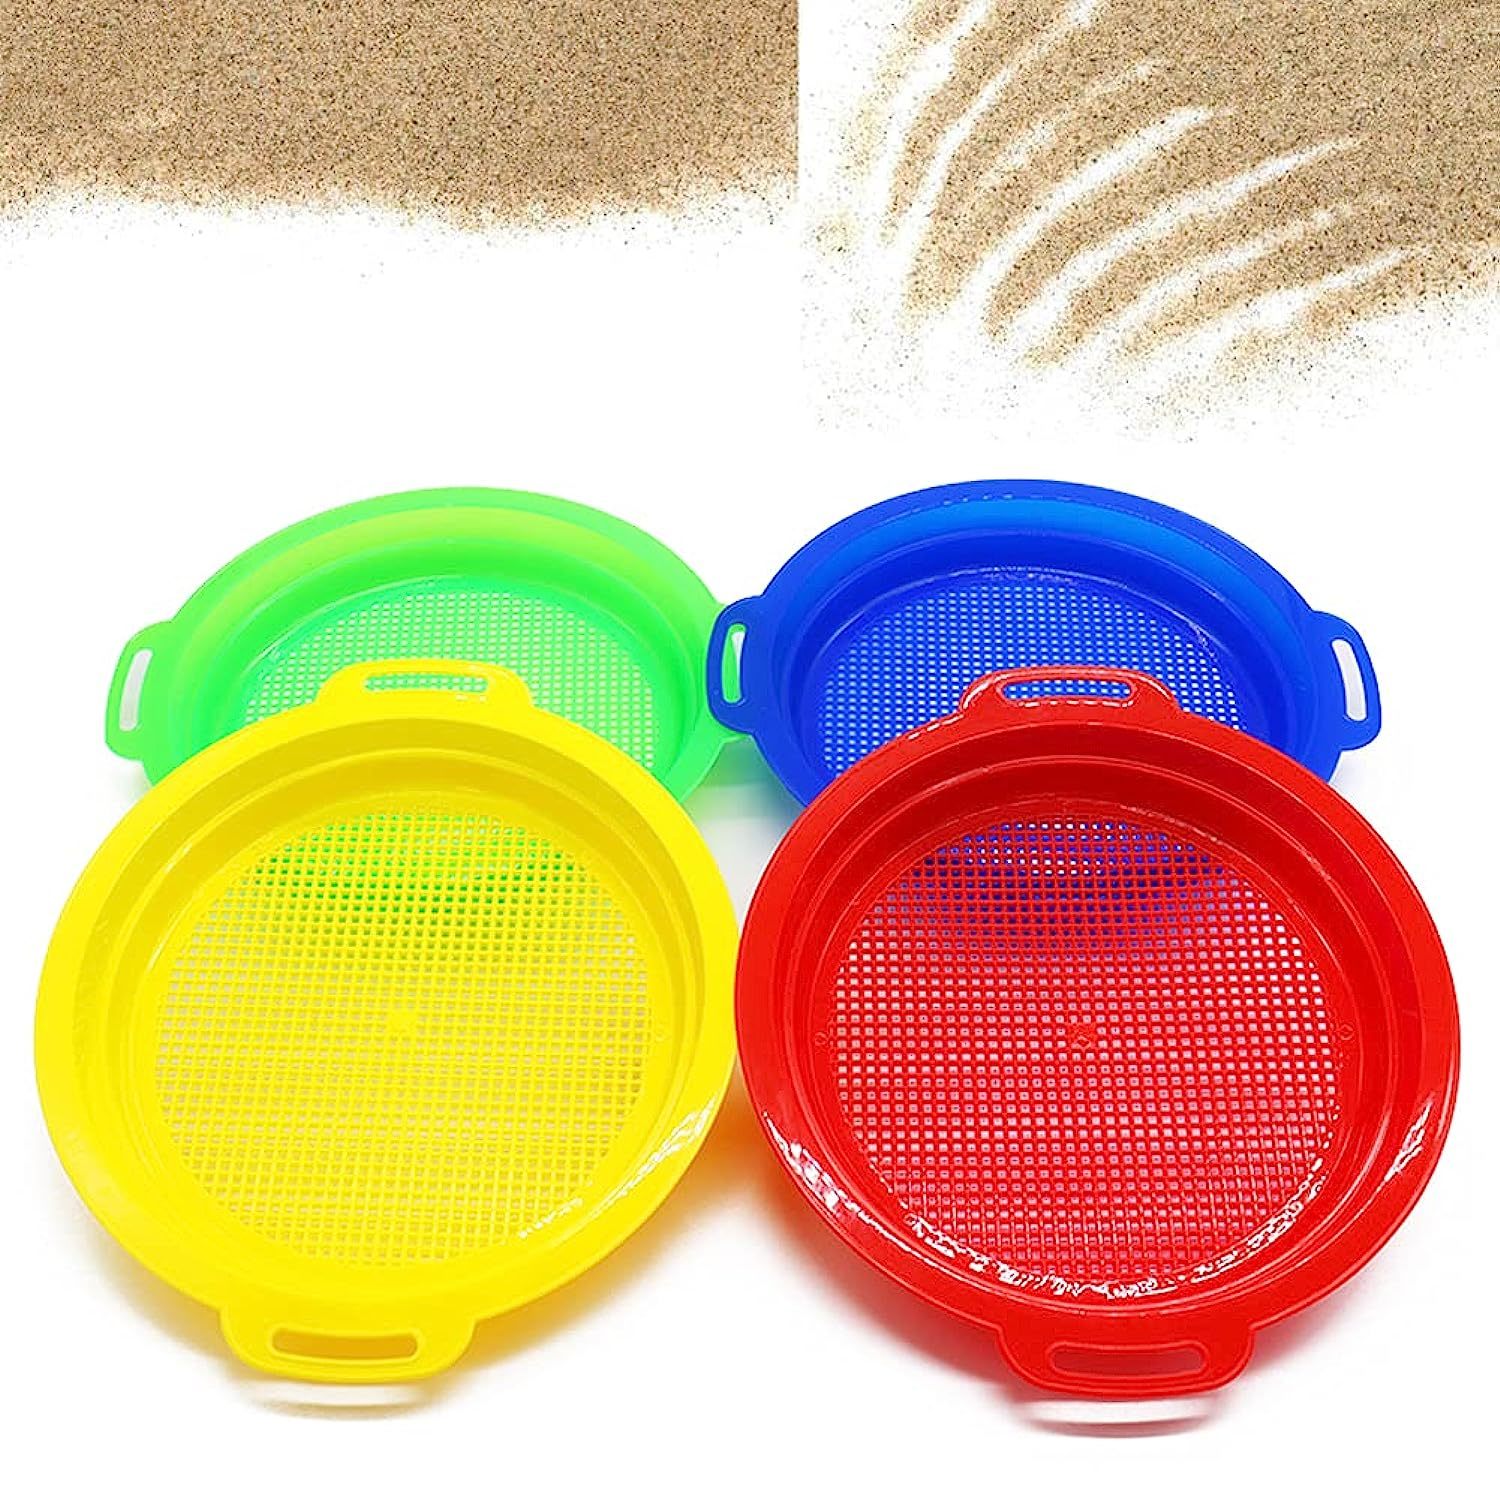 Primary image for 4 Pcs Sands Multi-Colored Sand Sifters,Plastic Sand Sifter,Sand Sifter Sieves Fo